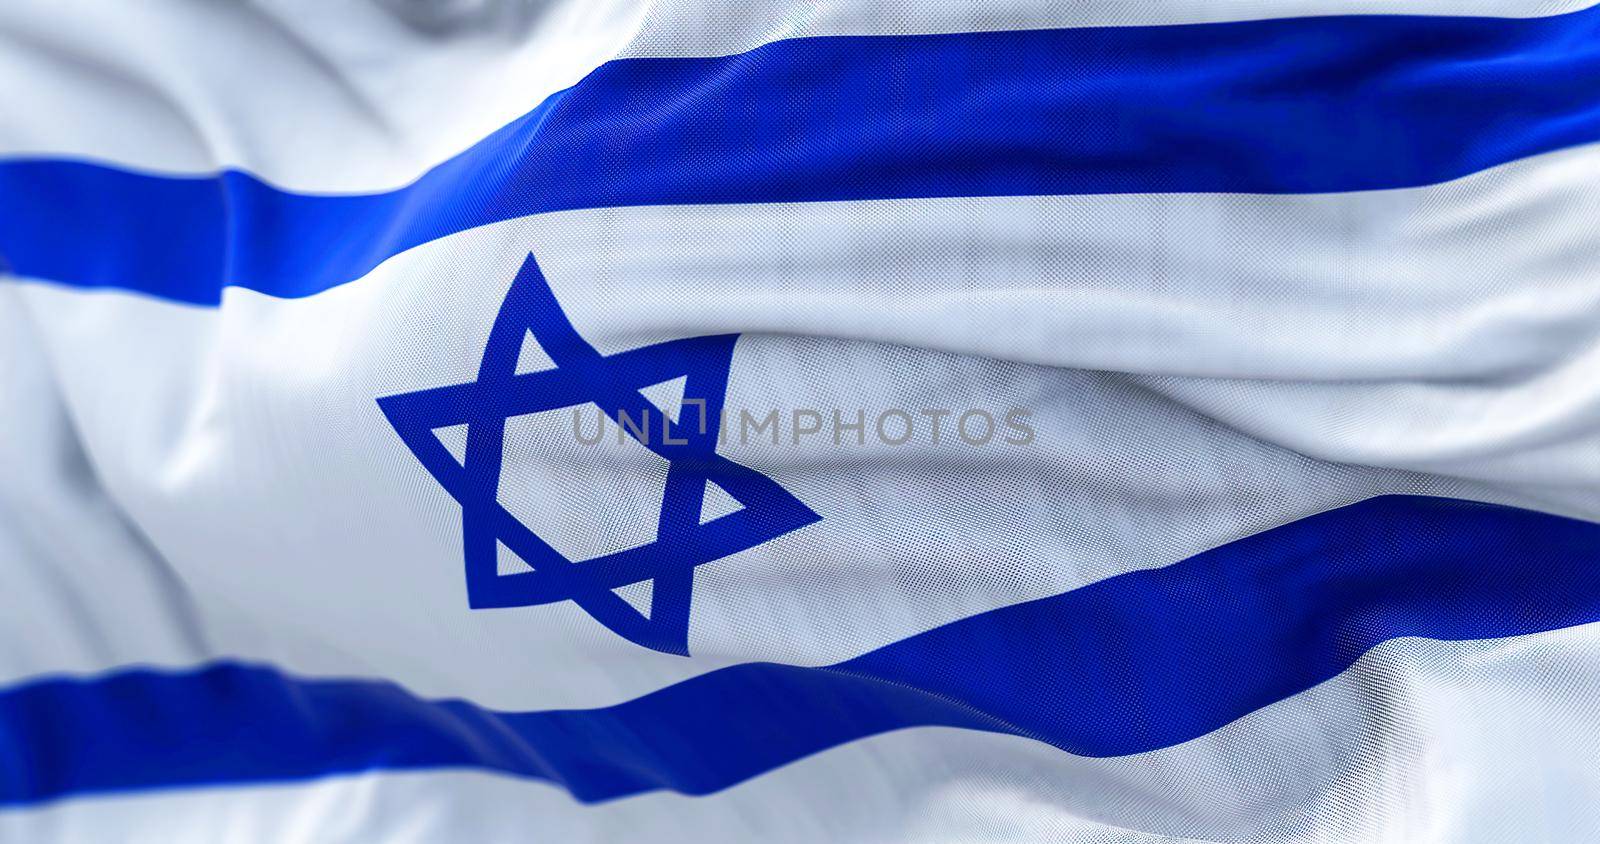 Close-up view of the Israel national flag waving in the wind by rarrarorro